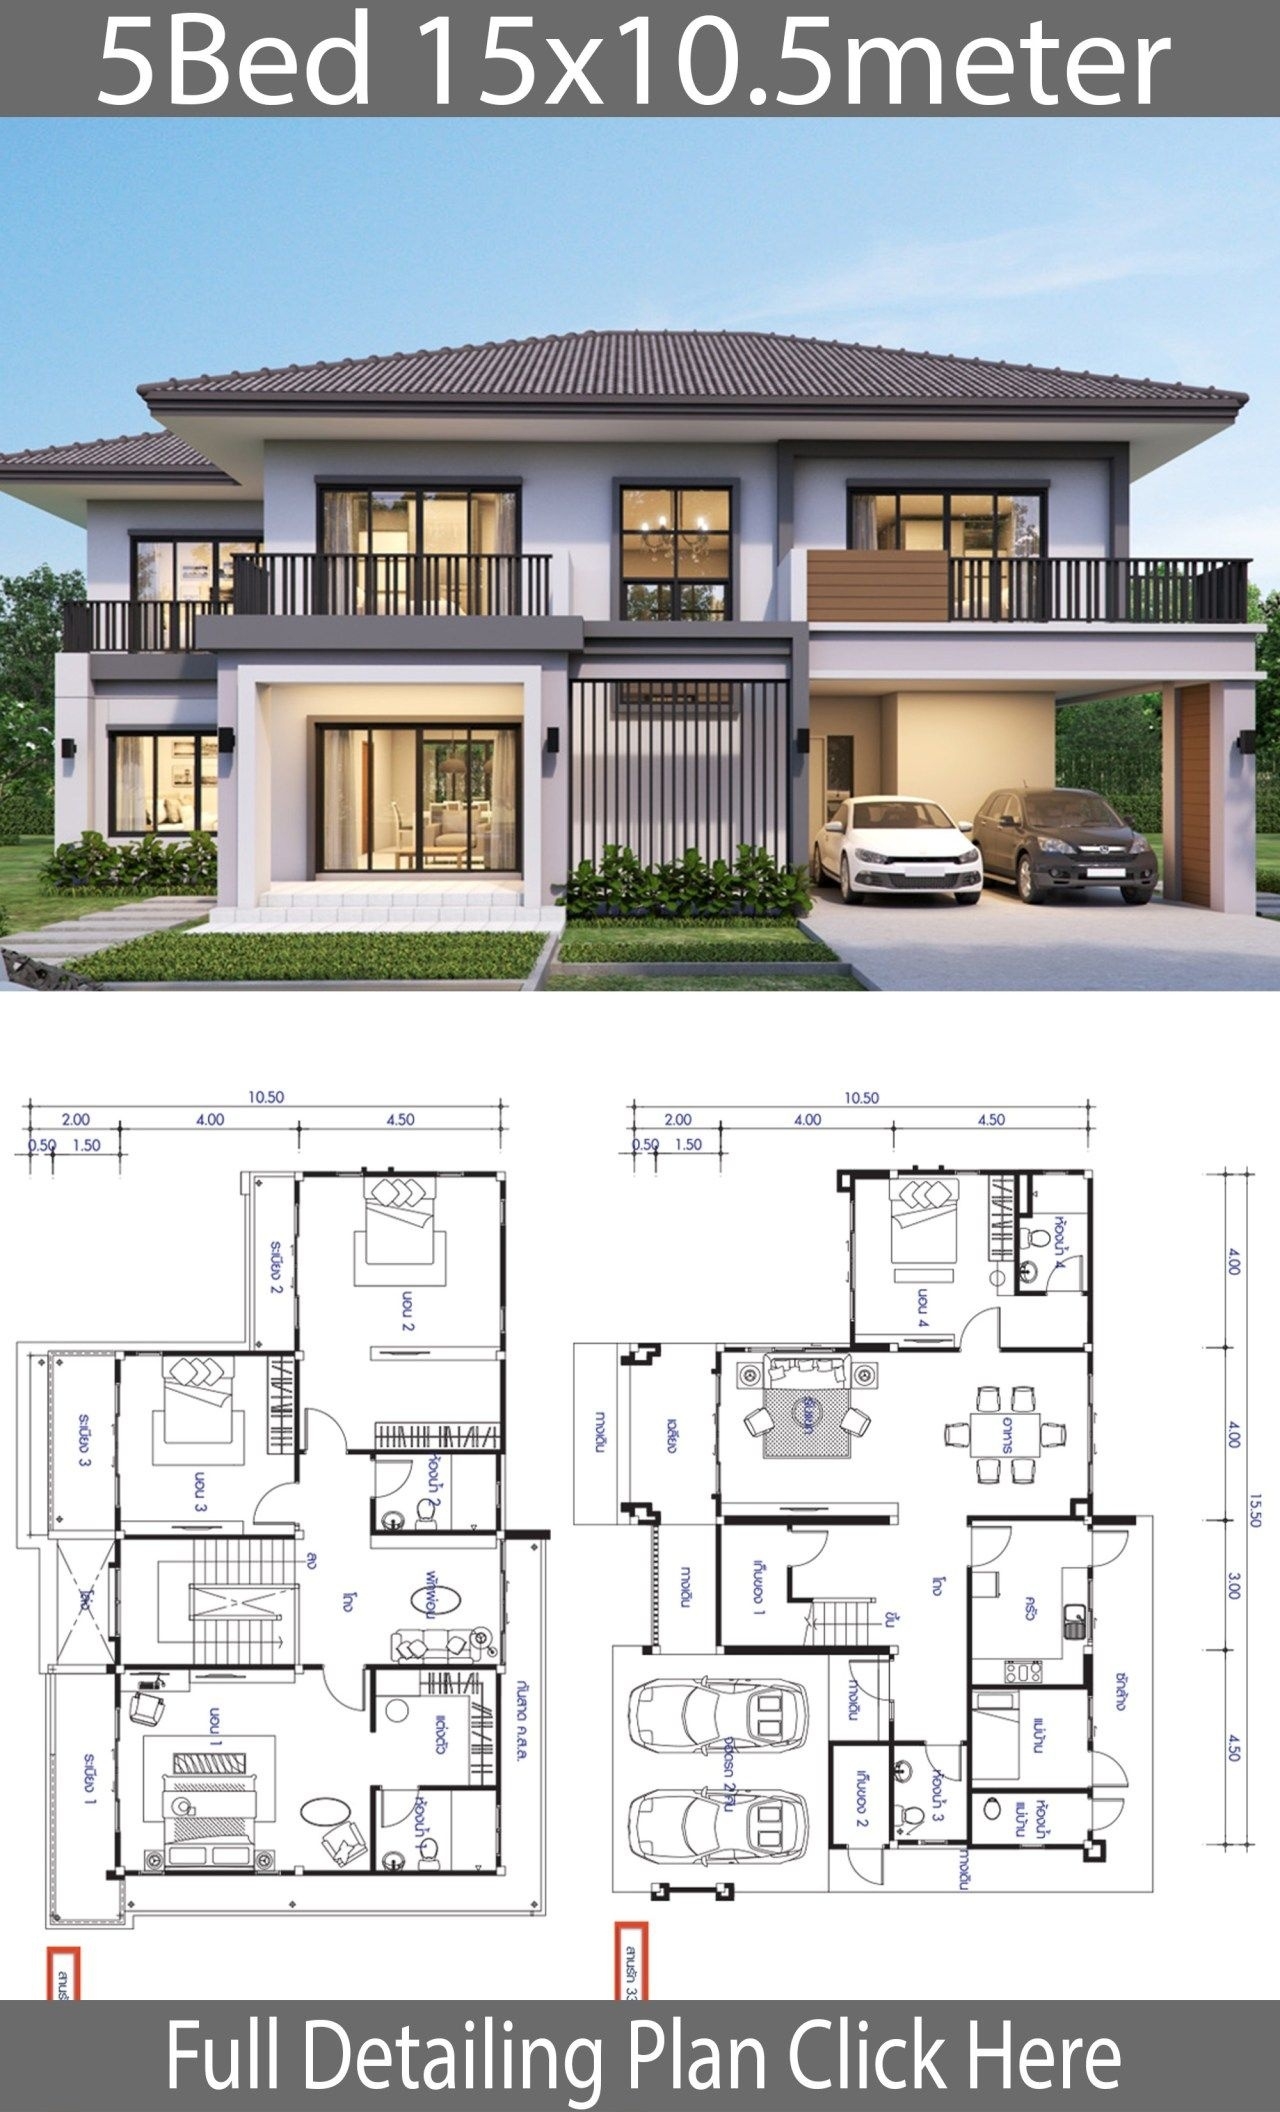 Outstanding house design plan 15 5x10 5m with 5 bedrooms home ideas | haus design inside classy five bedroom flat